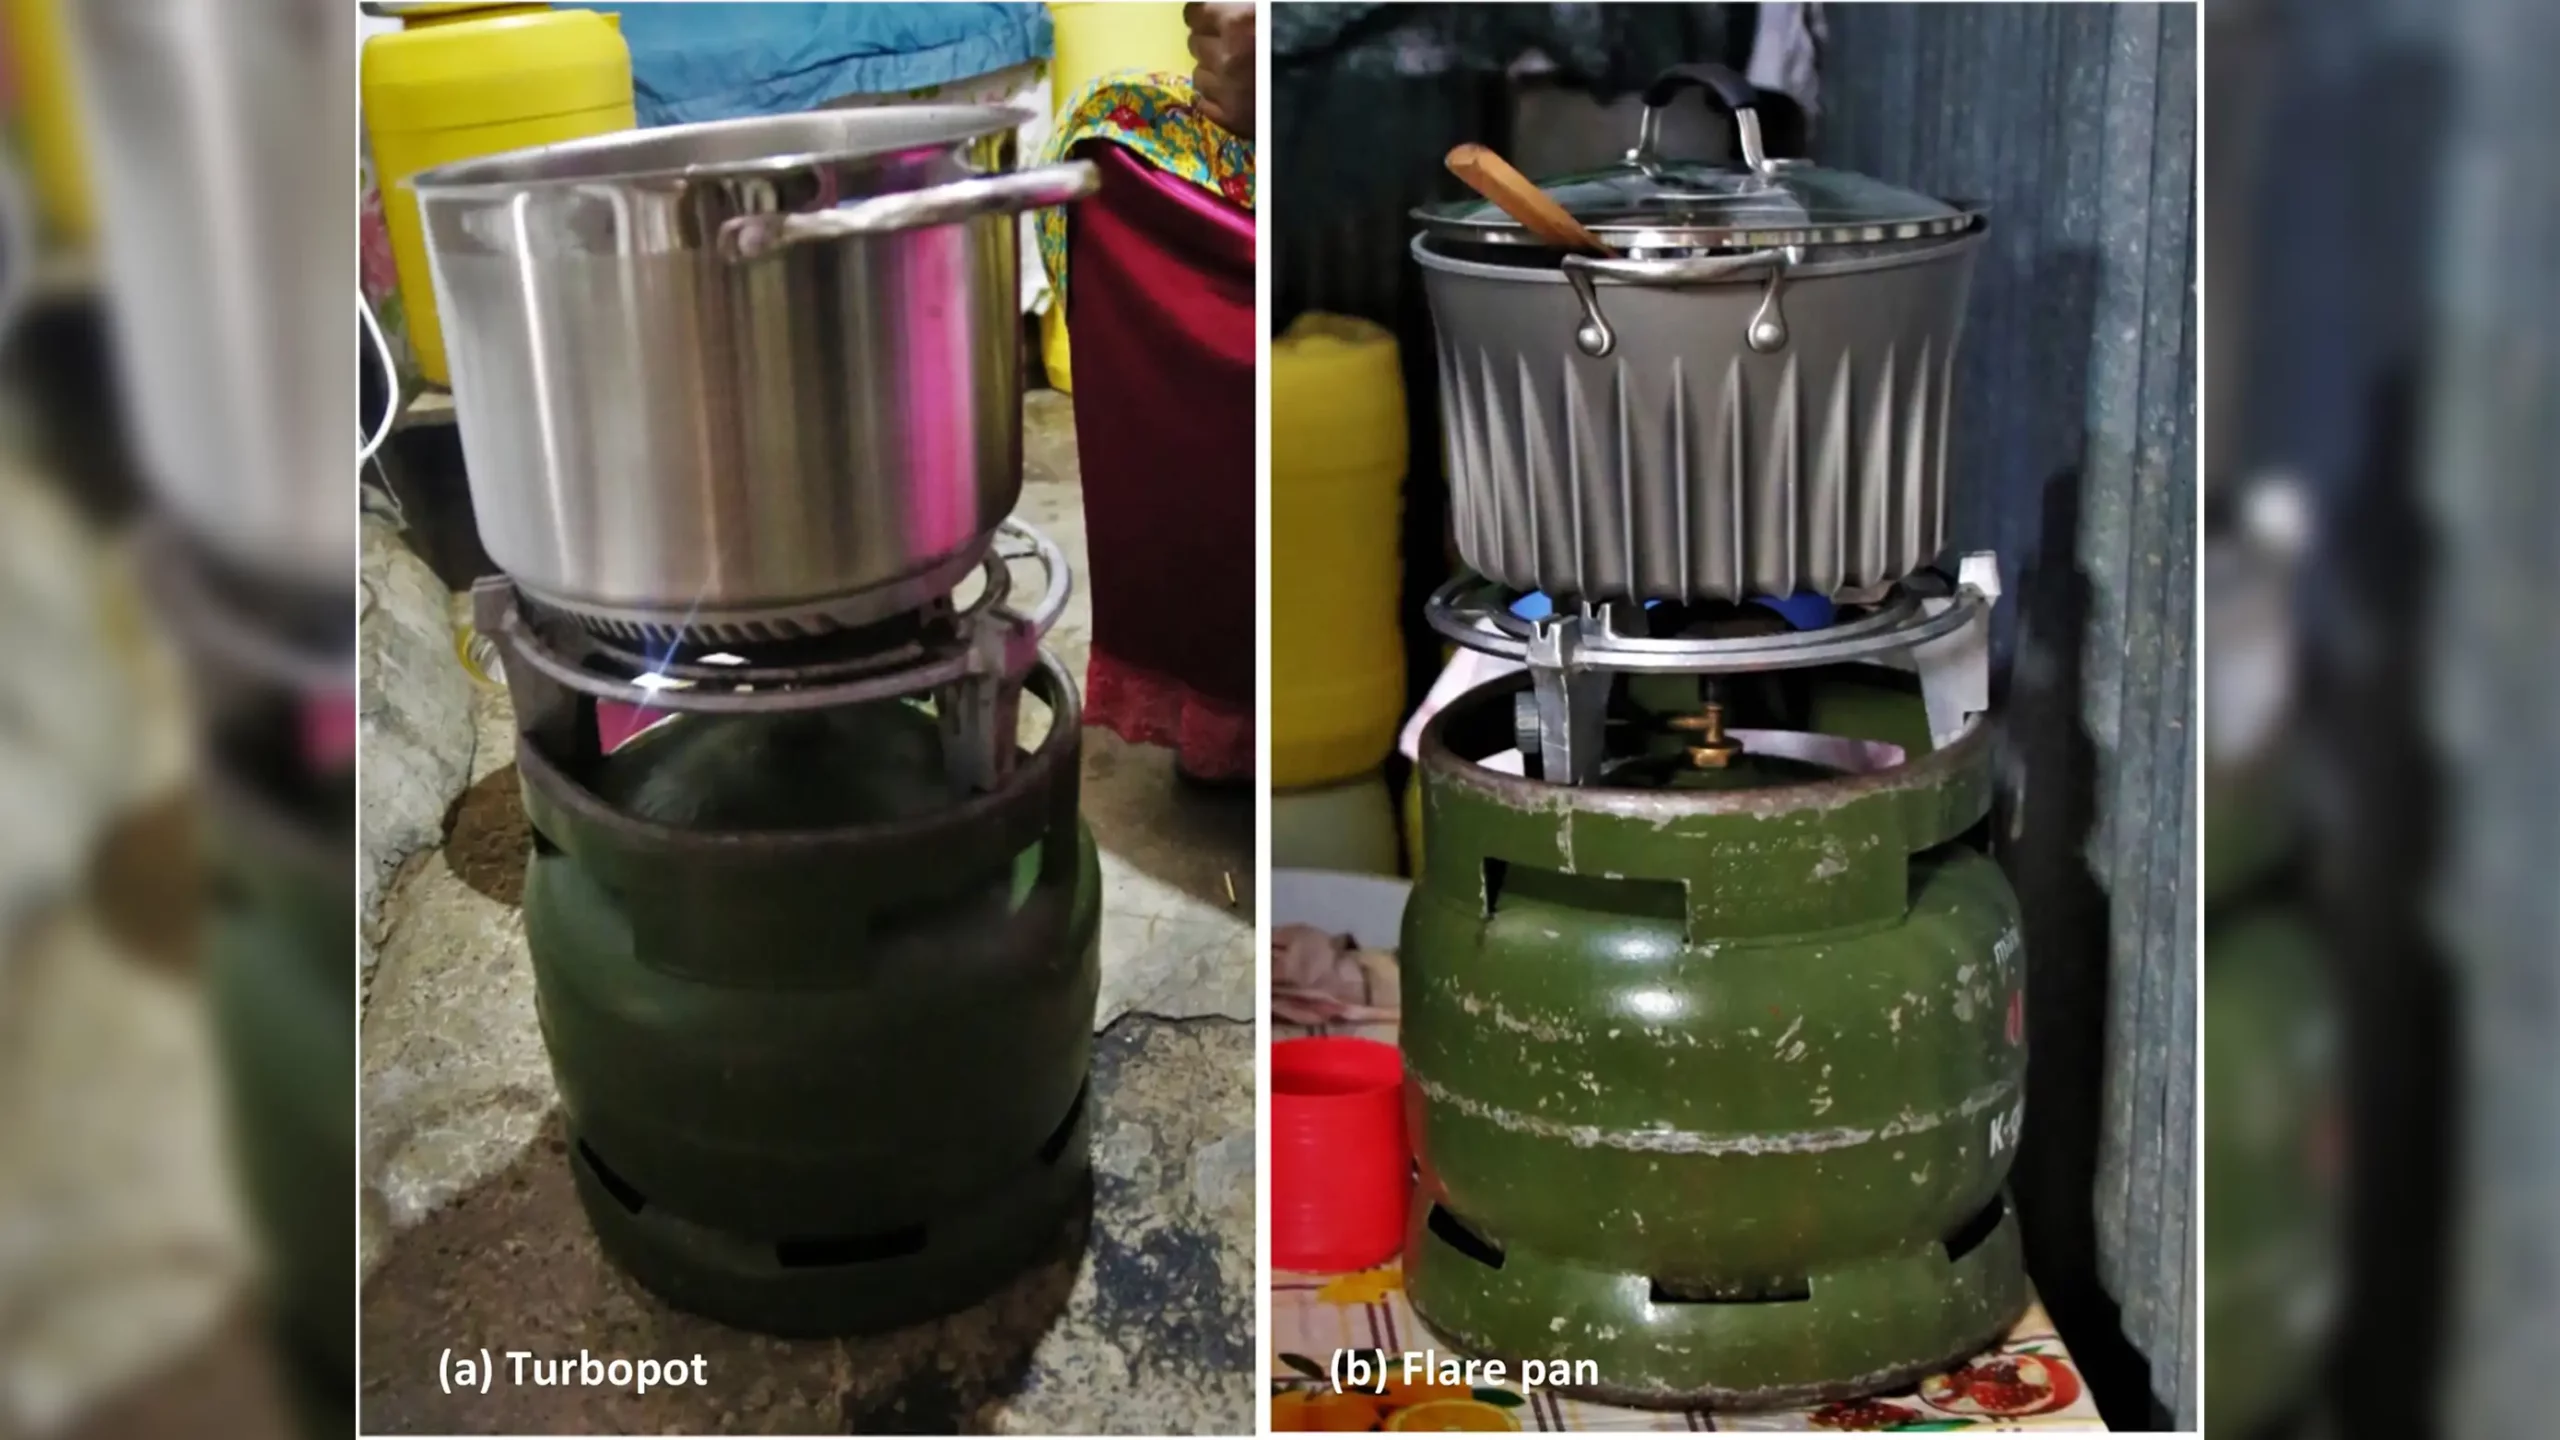 The role of innovative cookware in supporting uptake of LPG in low-income households